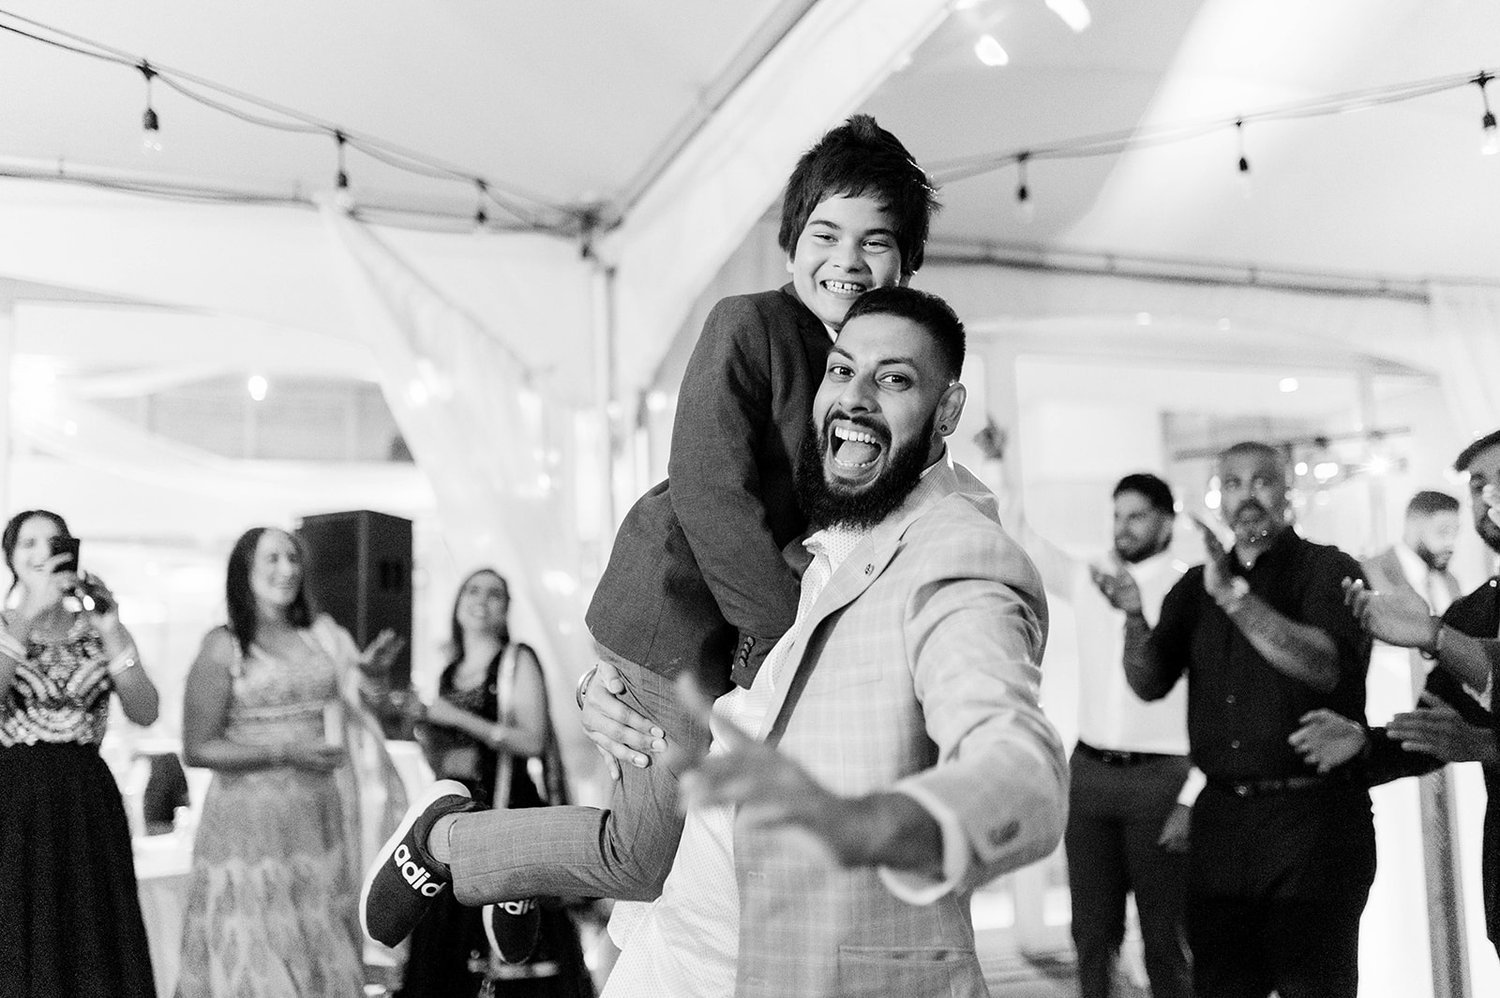 A father and son laugh as the father lifts his son on the dancefloor.